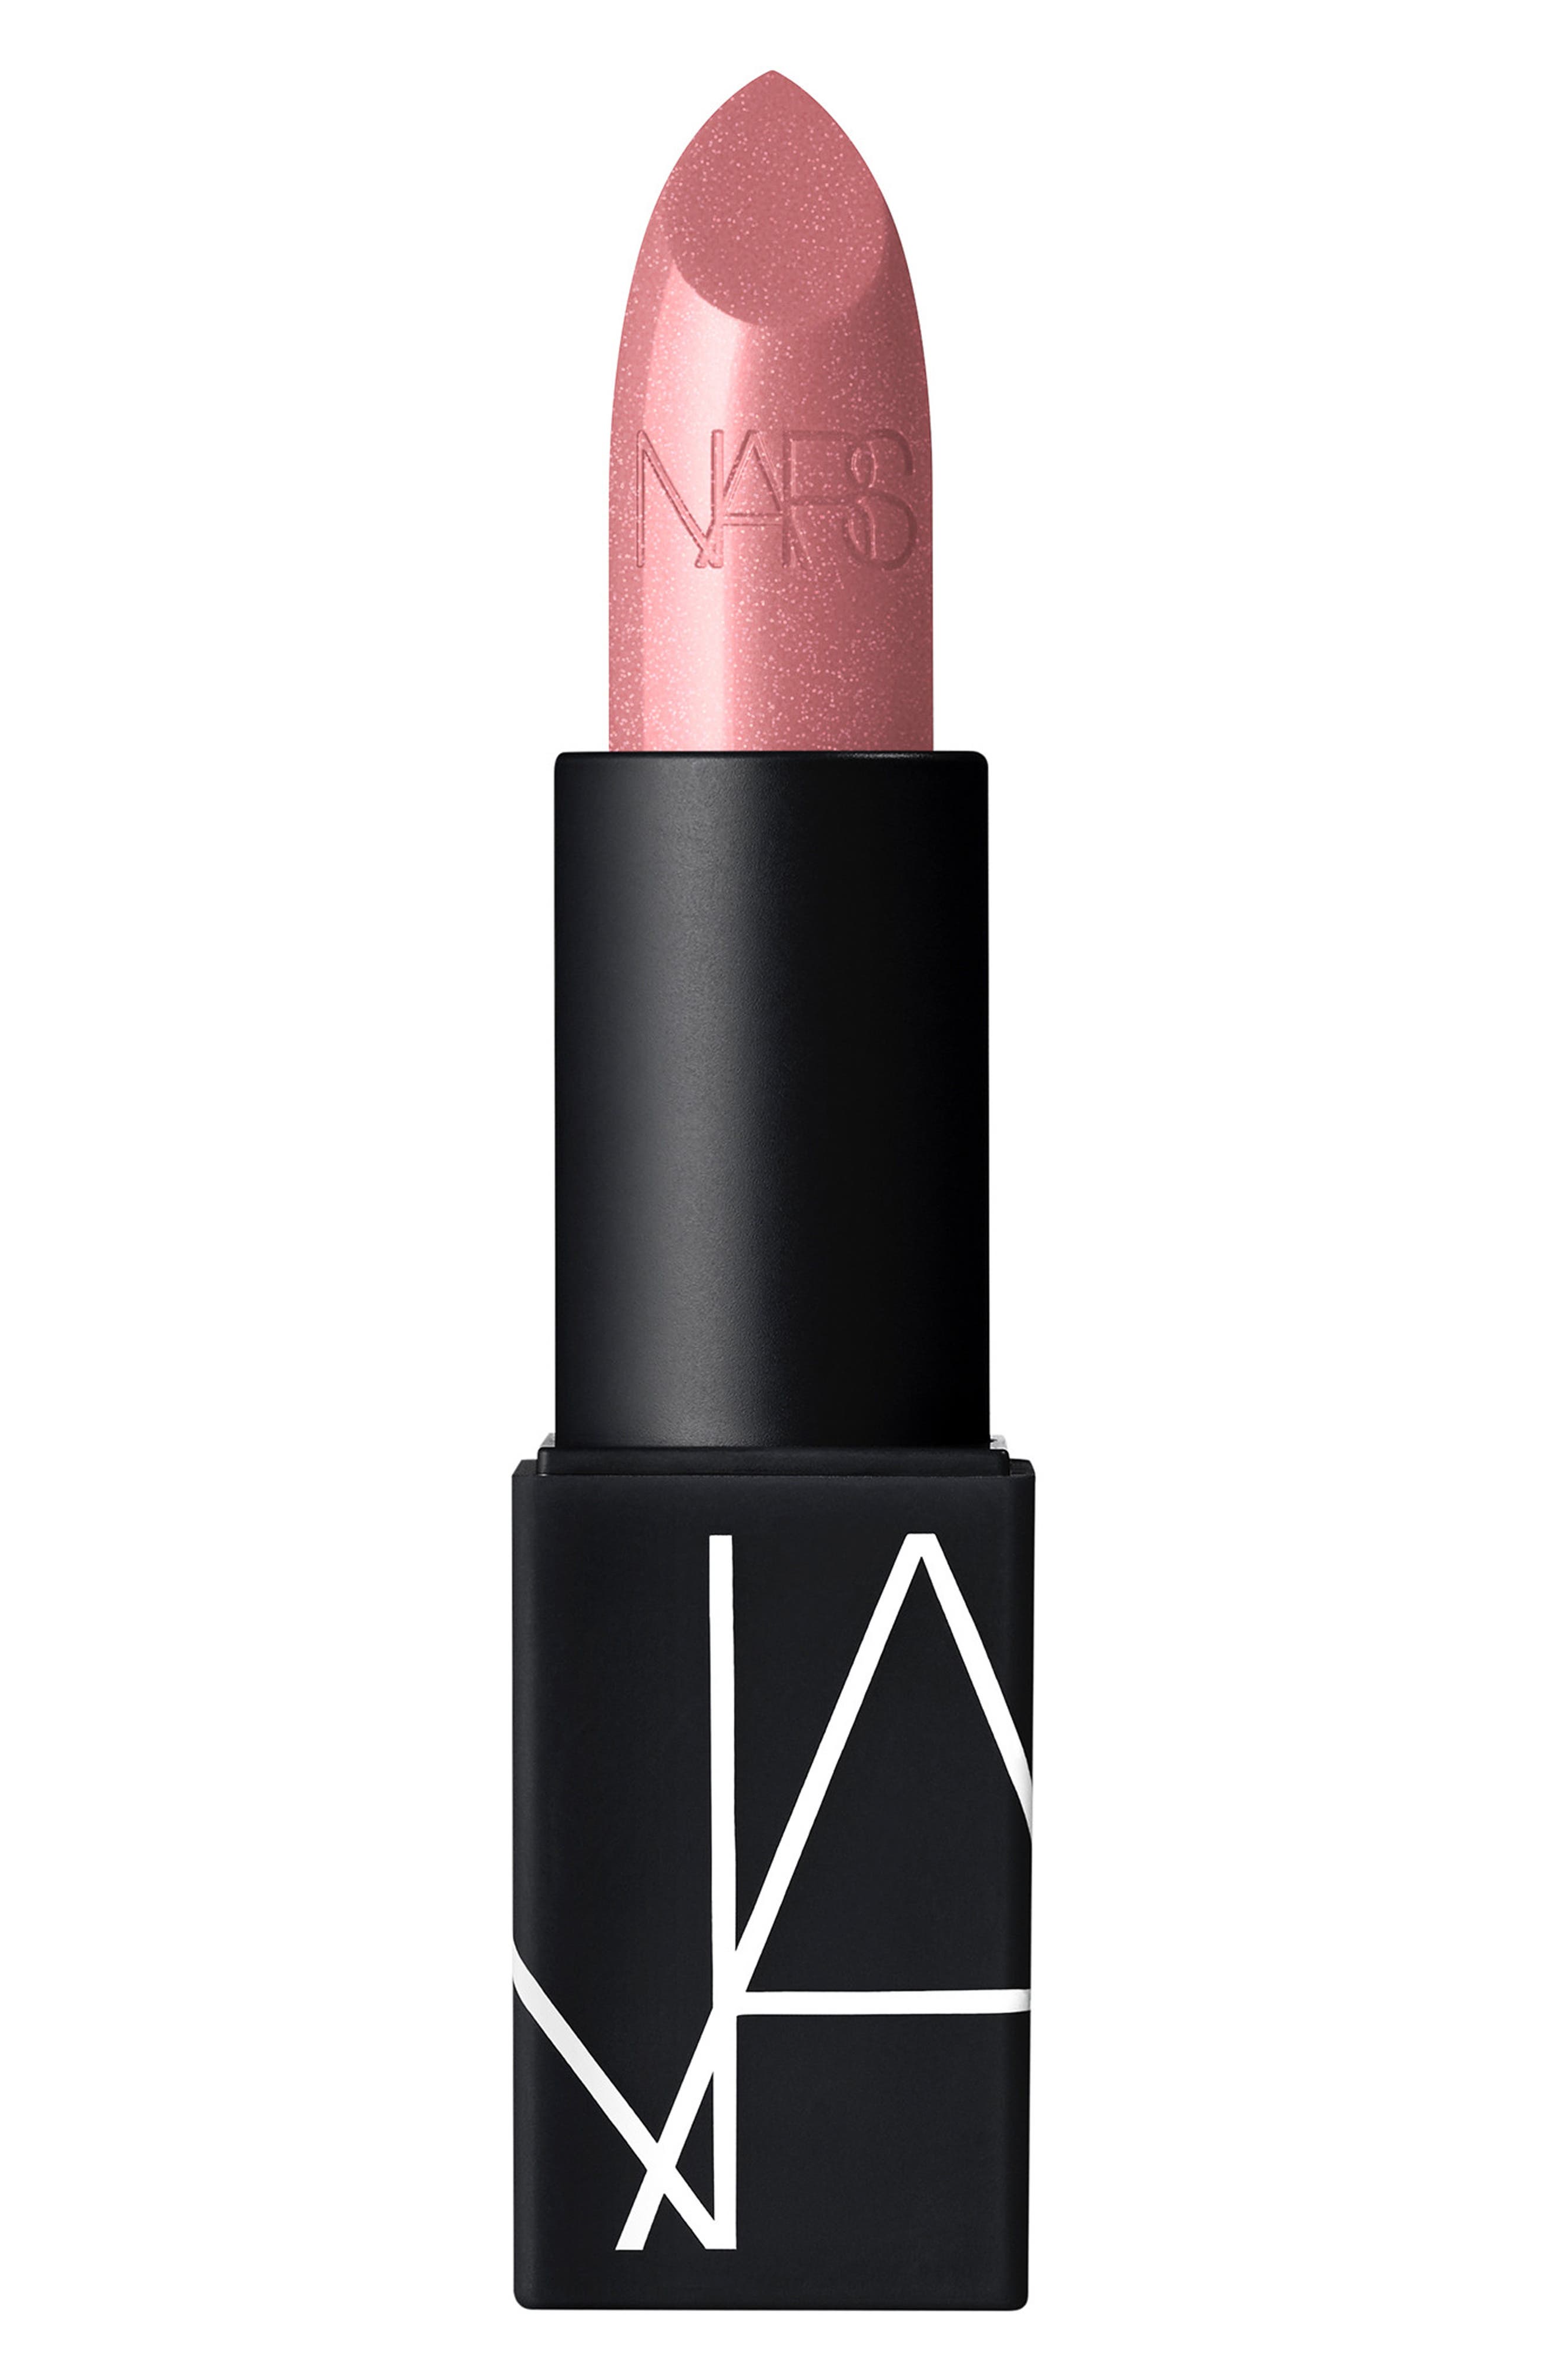 UPC 607845029557 product image for NARS Sheer Lipstick in Instant Crush at Nordstrom | upcitemdb.com